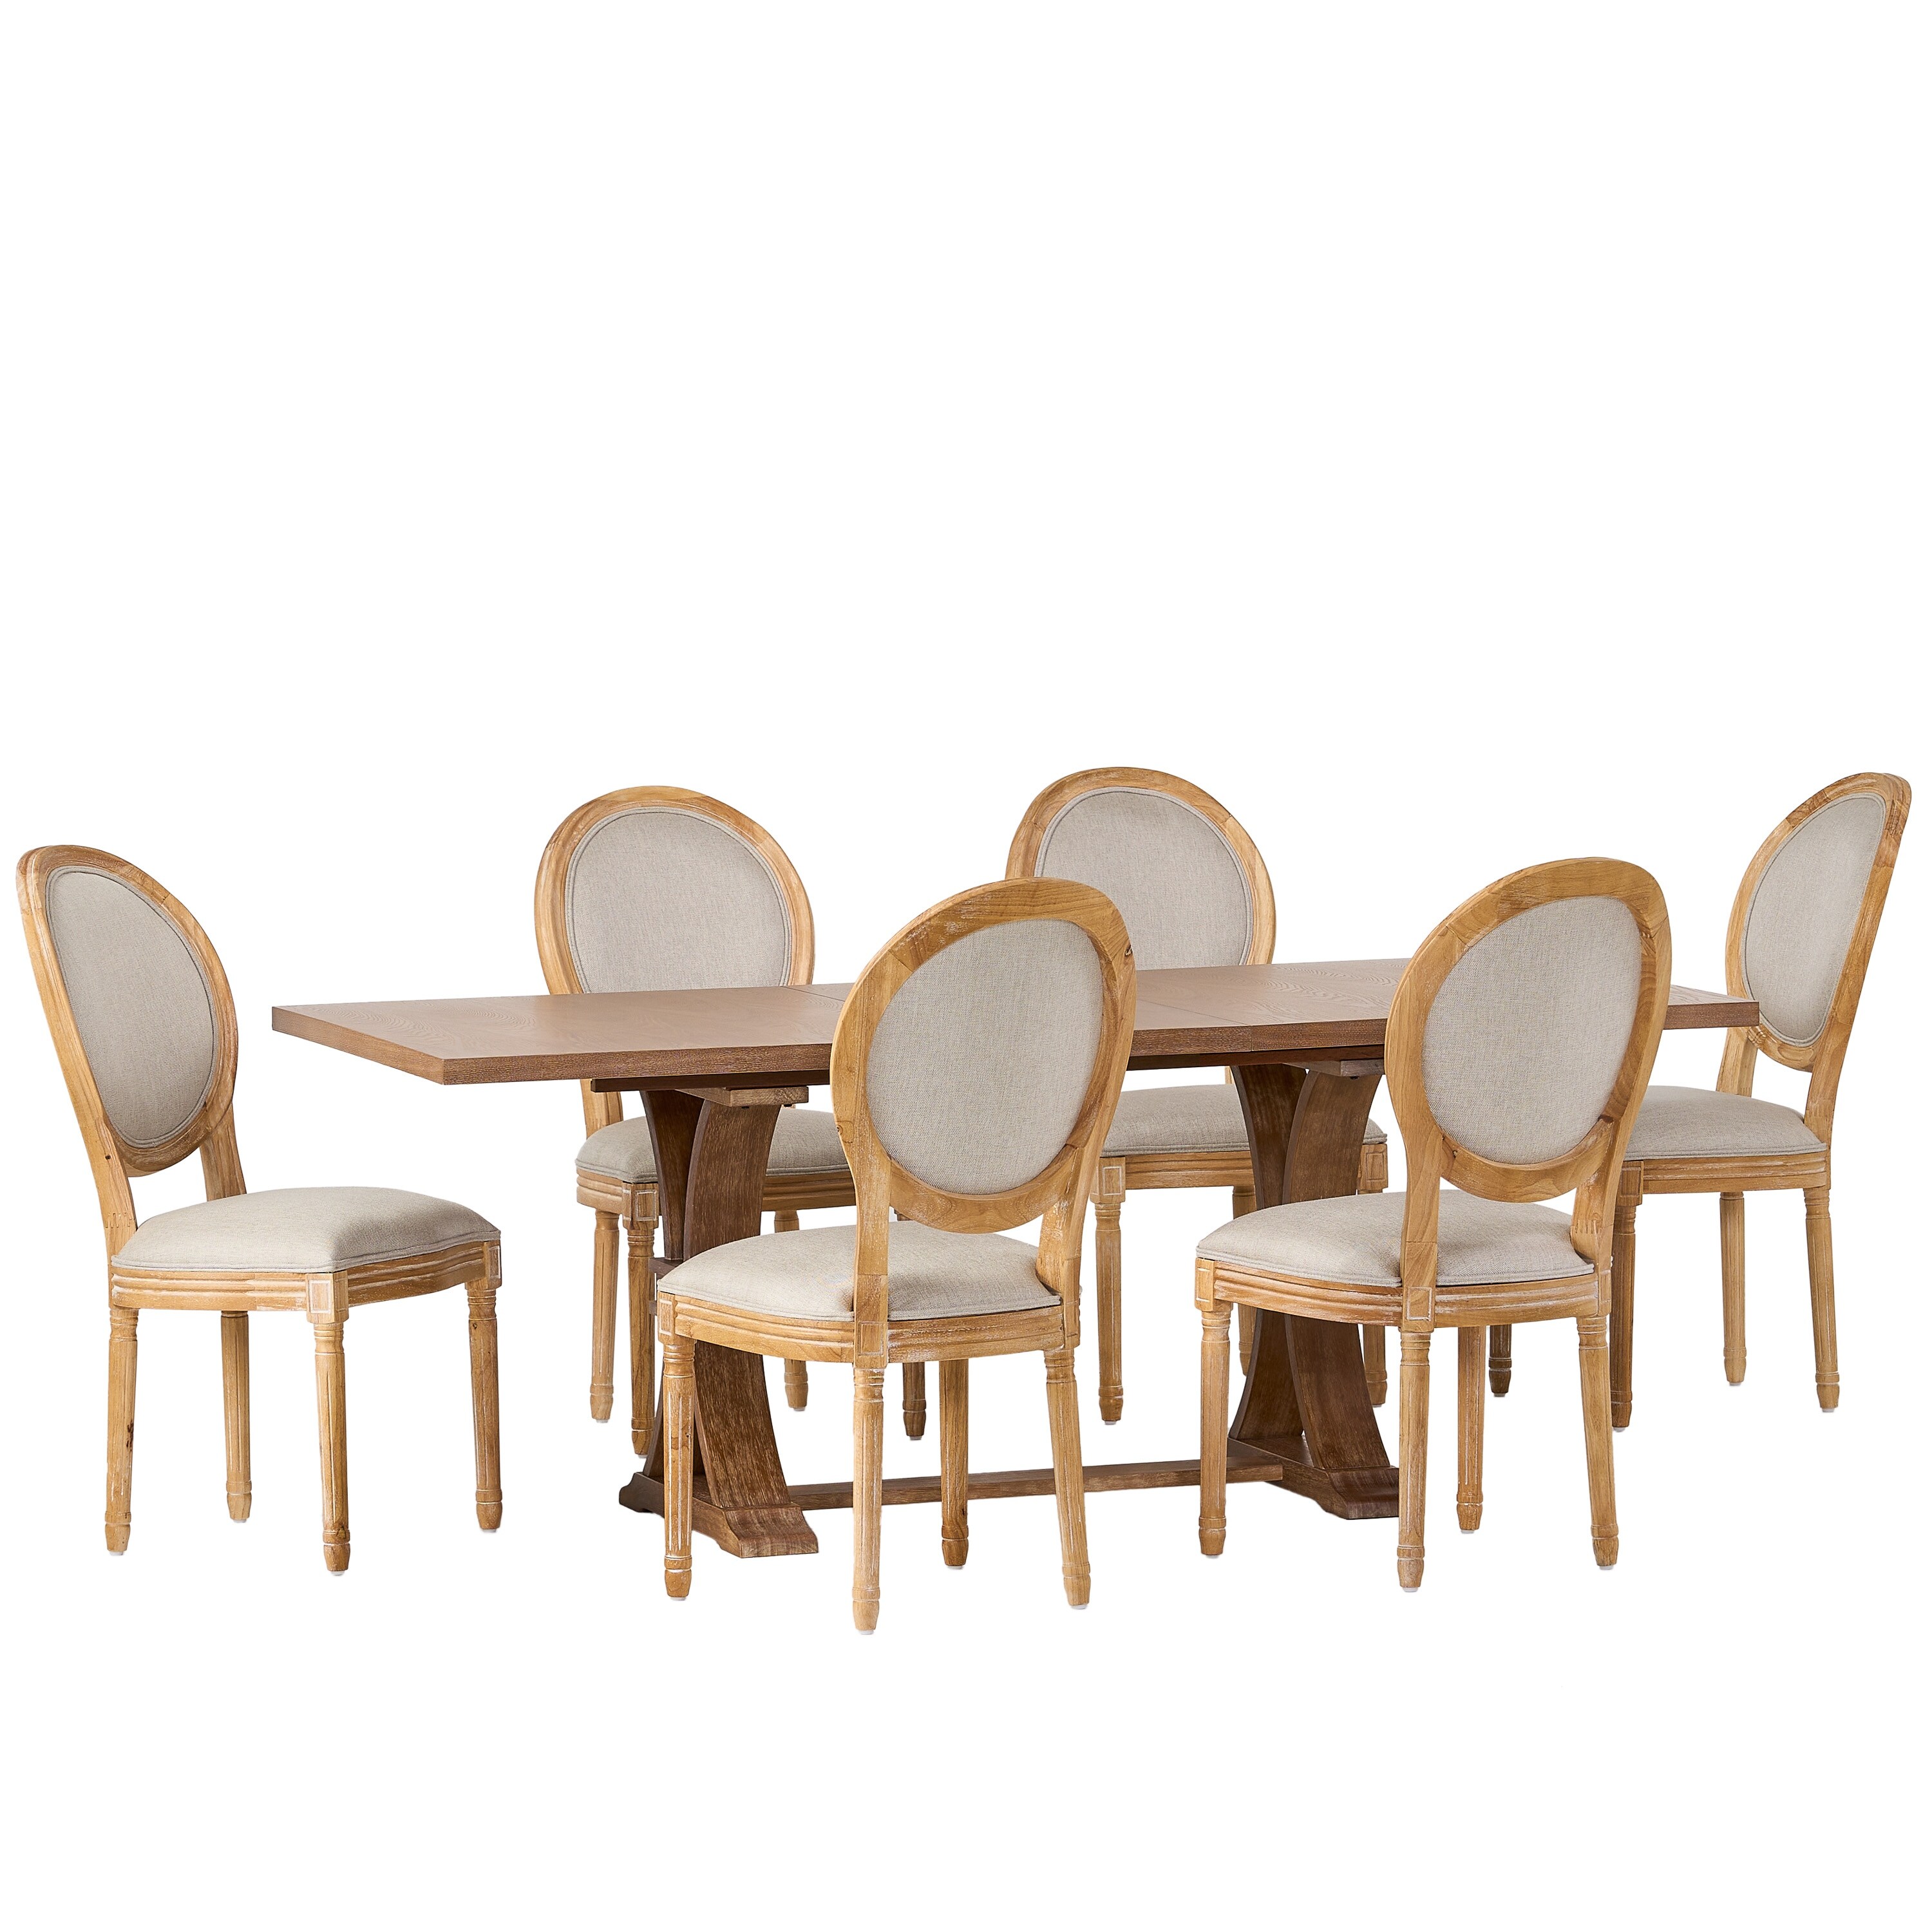 Christopher Knight Home Derring 7 Piece Dining Set